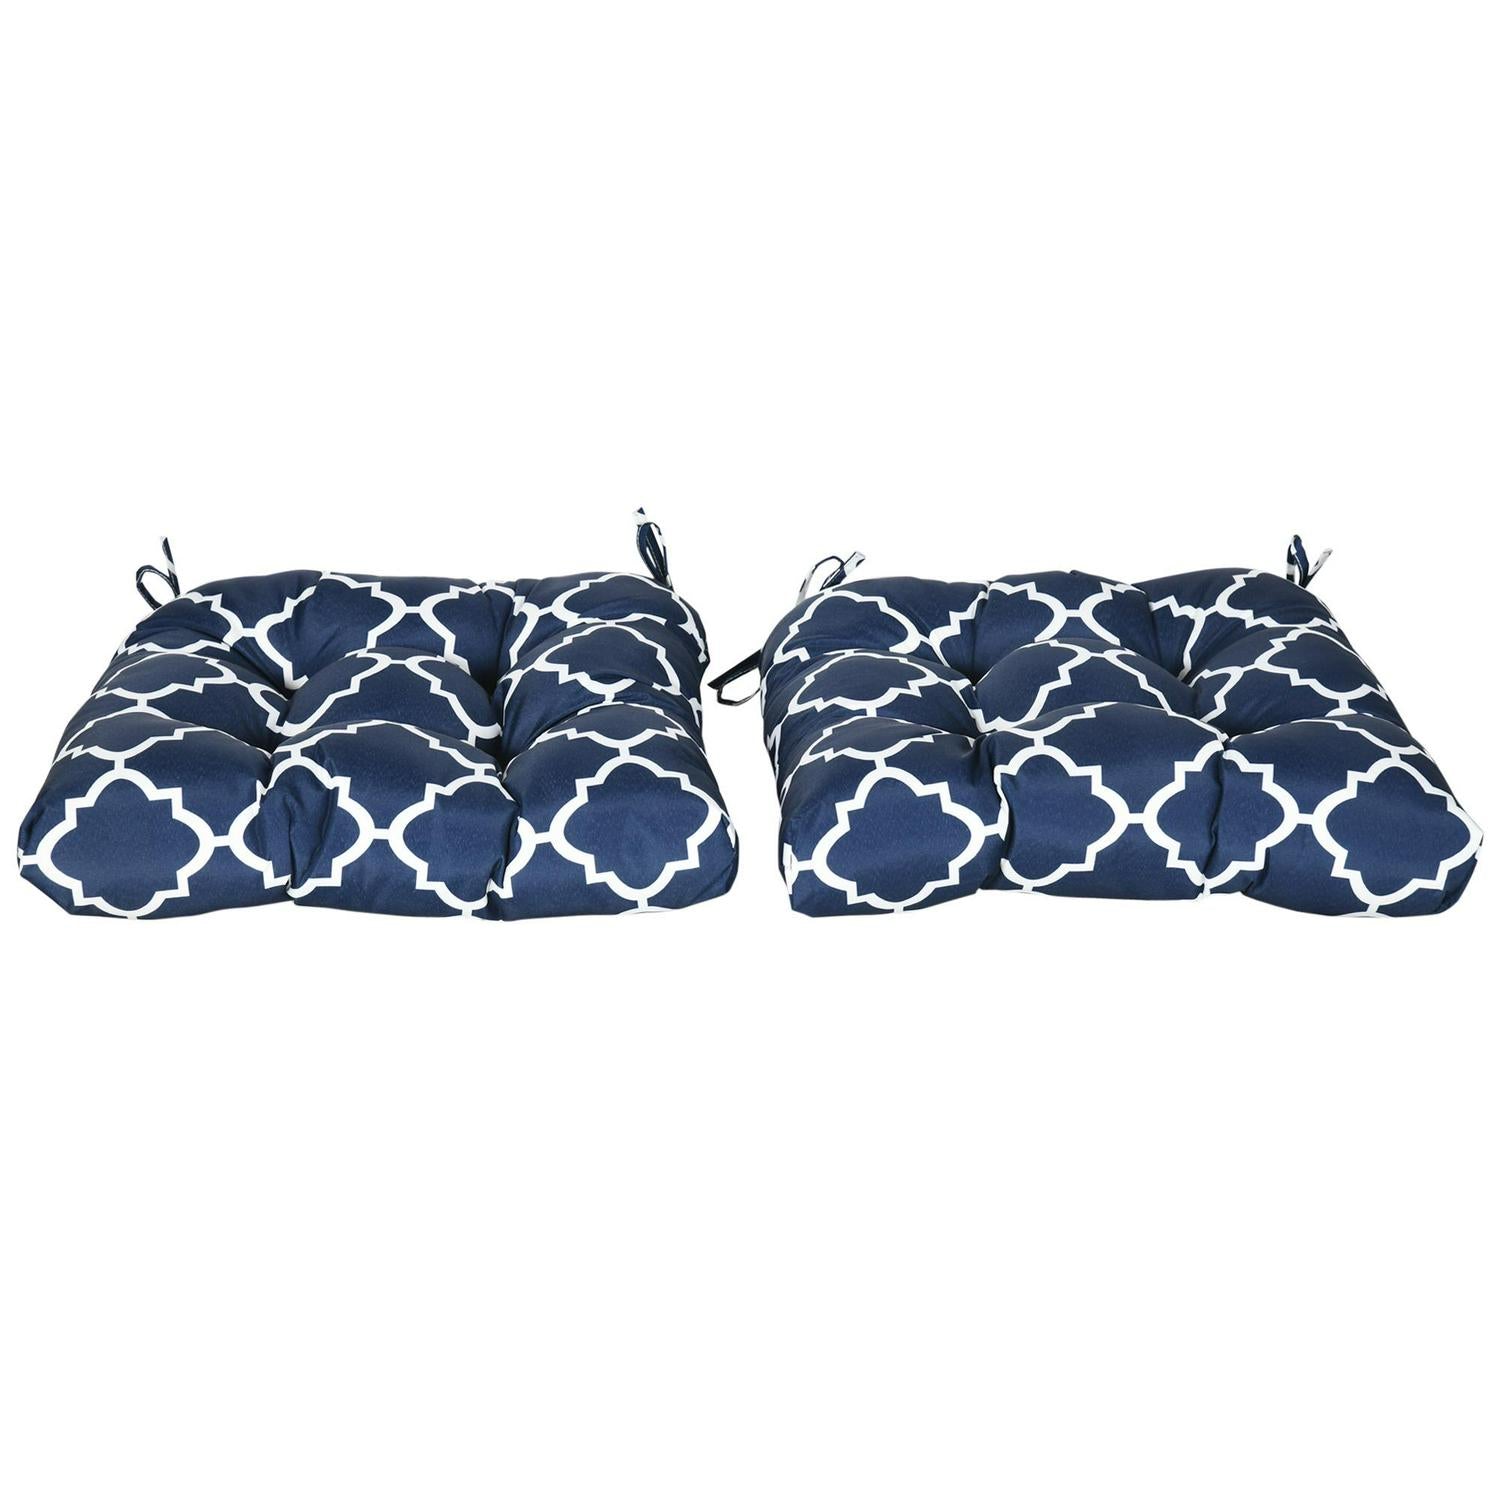 Set Of 2 Chair Cushions Seat Pads Indoor Outdoor With Ties And Tufted Design For Garden Chairs, Blue